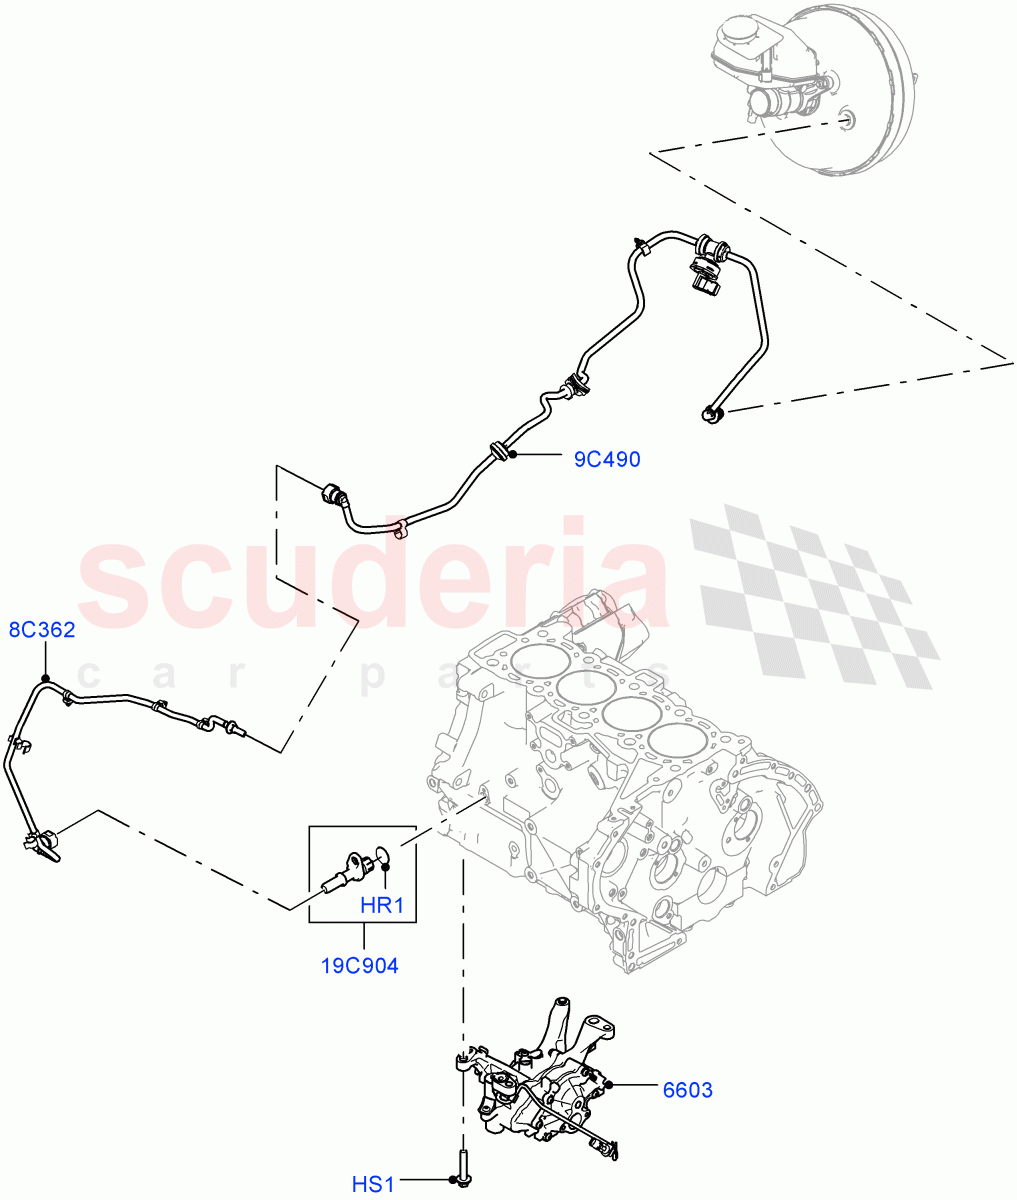 Vacuum Control And Air Injection(2.0L I4 DSL MID DOHC AJ200,Itatiaia (Brazil),Starter - Stop/Start System)((V)FROMGT000001) of Land Rover Land Rover Range Rover Evoque (2012-2018) [2.0 Turbo Diesel]